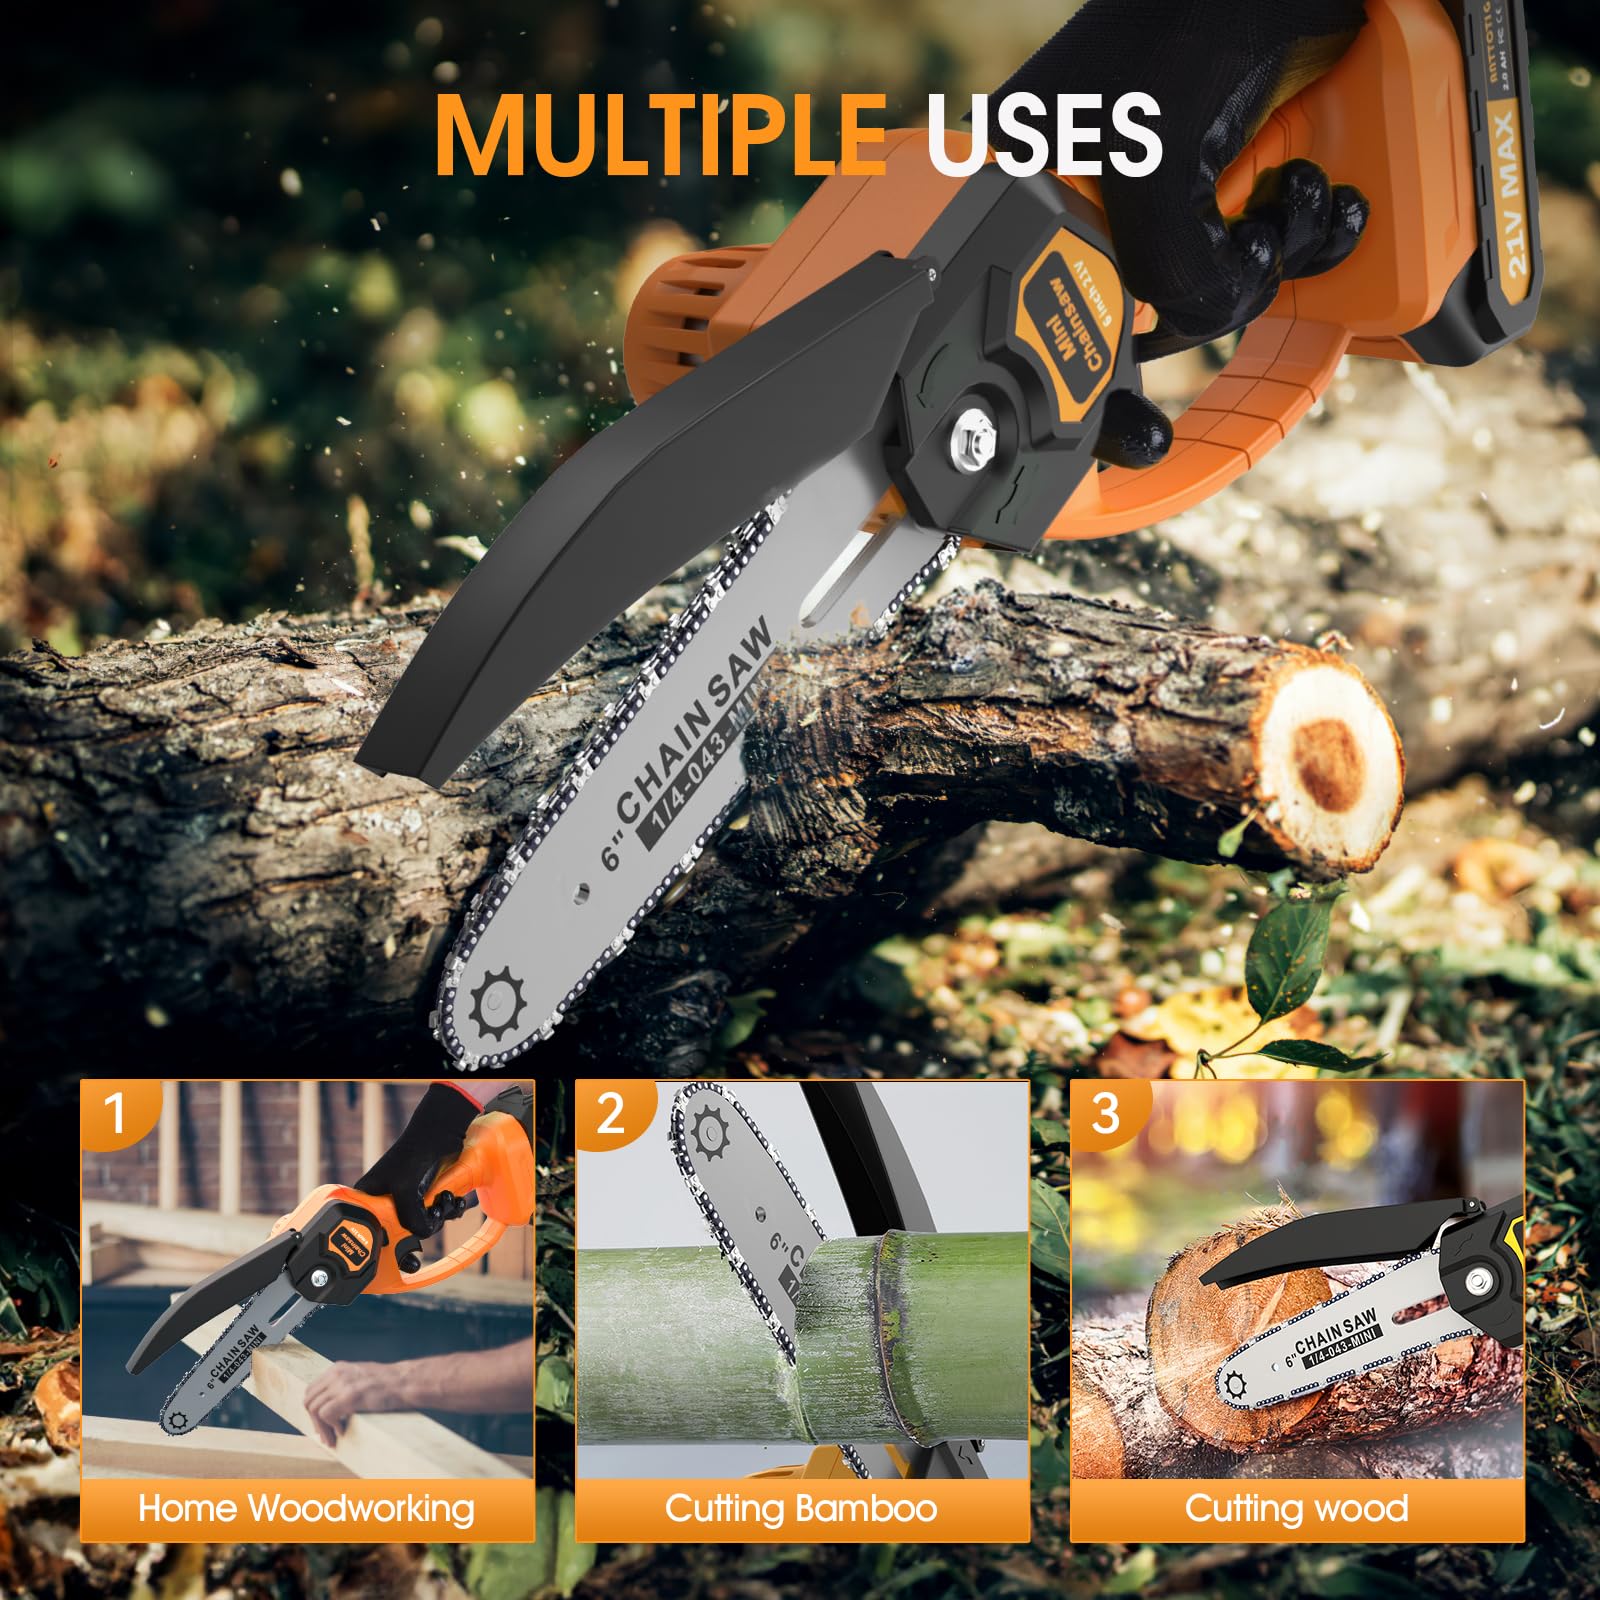 Anttctig Mini Chainsaw 6 inch Cordless, 21V/2Ah Battery Powered Chain Saw for Branch Pruning with 2 Chains, 2 Battery, Portable Electric Handheld Small Chainsaw w/Security Lock, for Tree Trimming